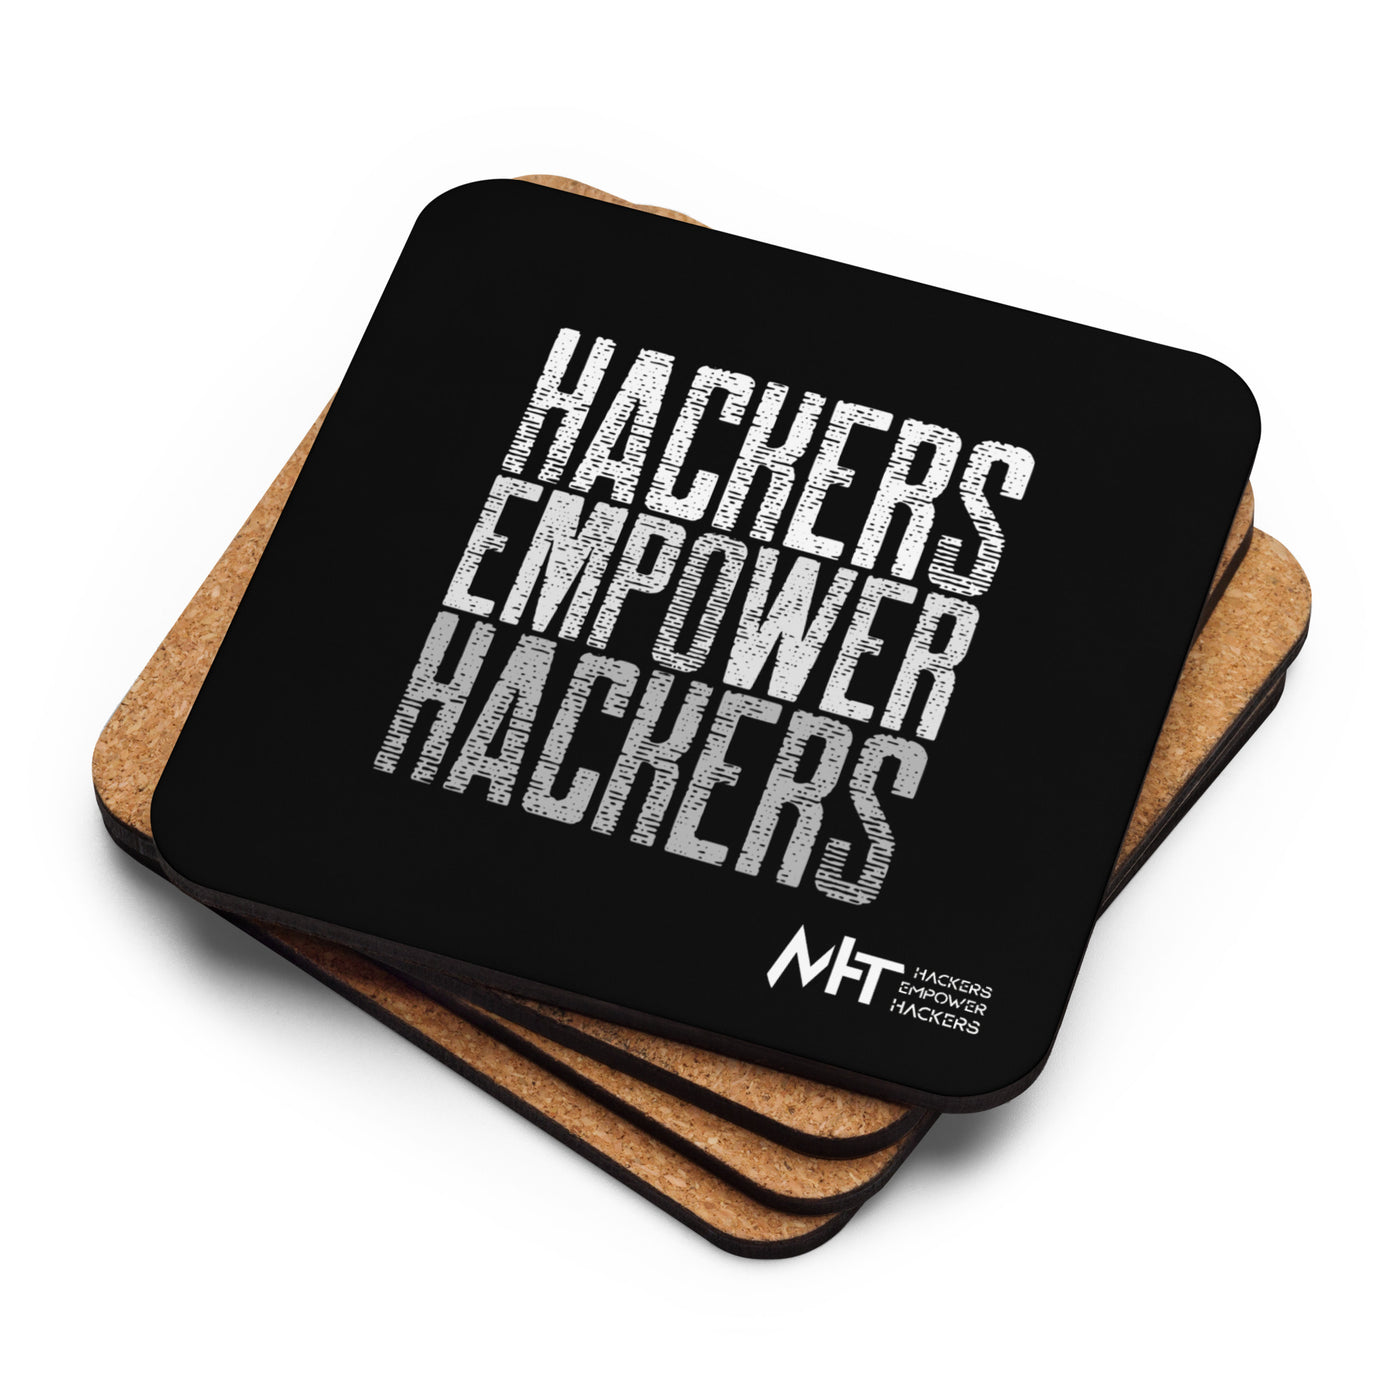 Hackers Empower Hackers V1 - Cork-back coaster